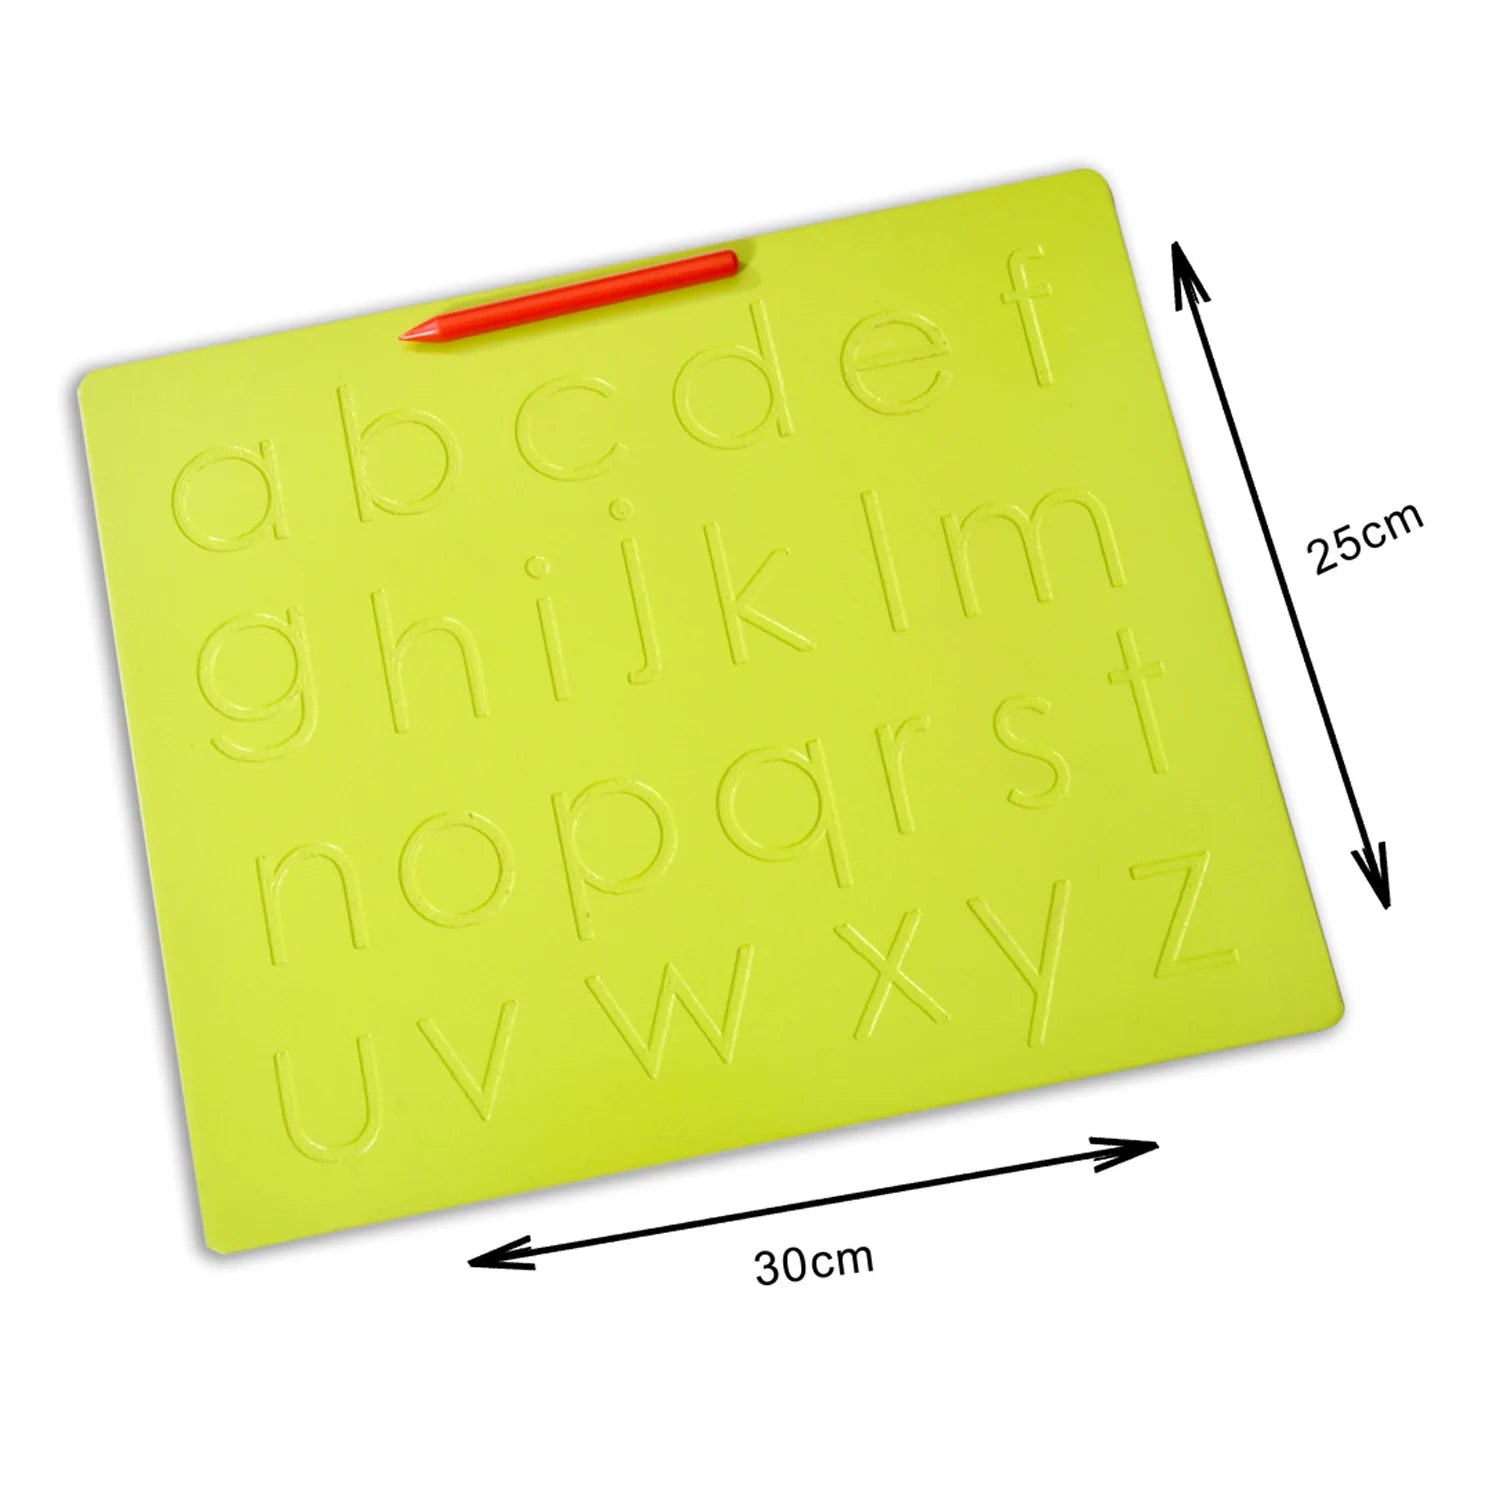 Buy Kidken Carving Small Alphabets With Numbers - SkilloToys.com